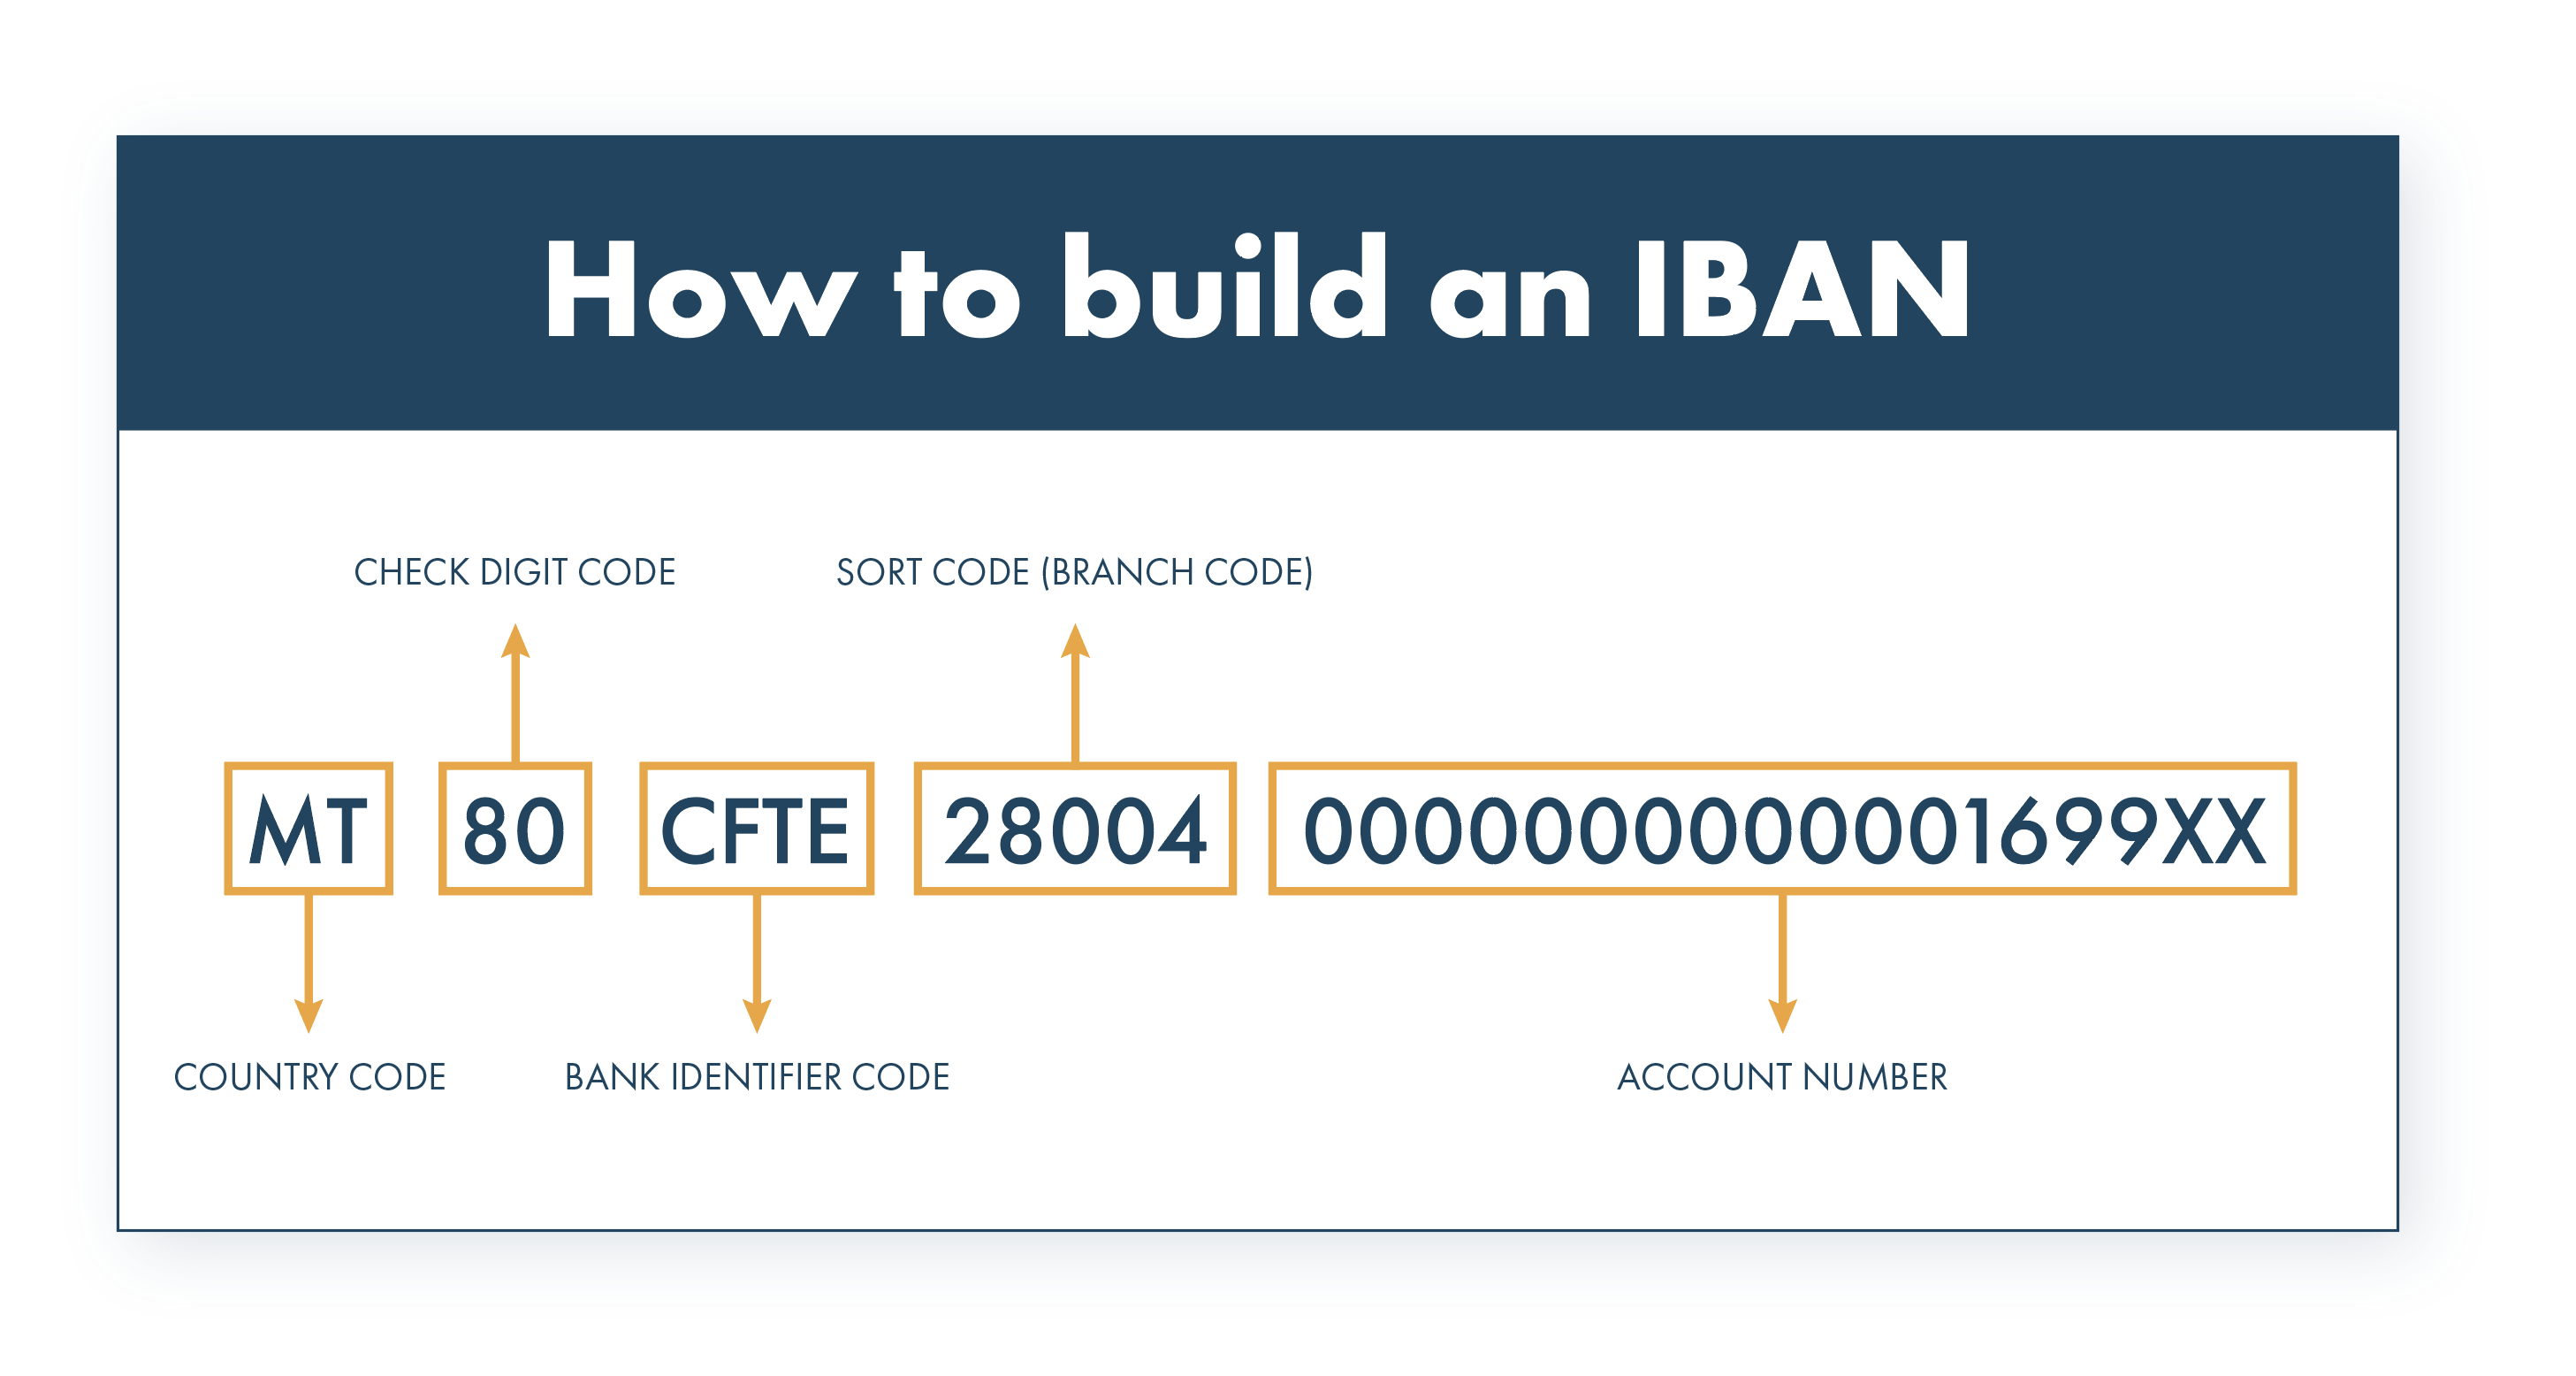 Virtual IBANs have such a long combination of letters and numbers they don’t look dissimilar to a WiFi password. It includes country code, check digit code, bank identifier code, sort code (branch code), account number.